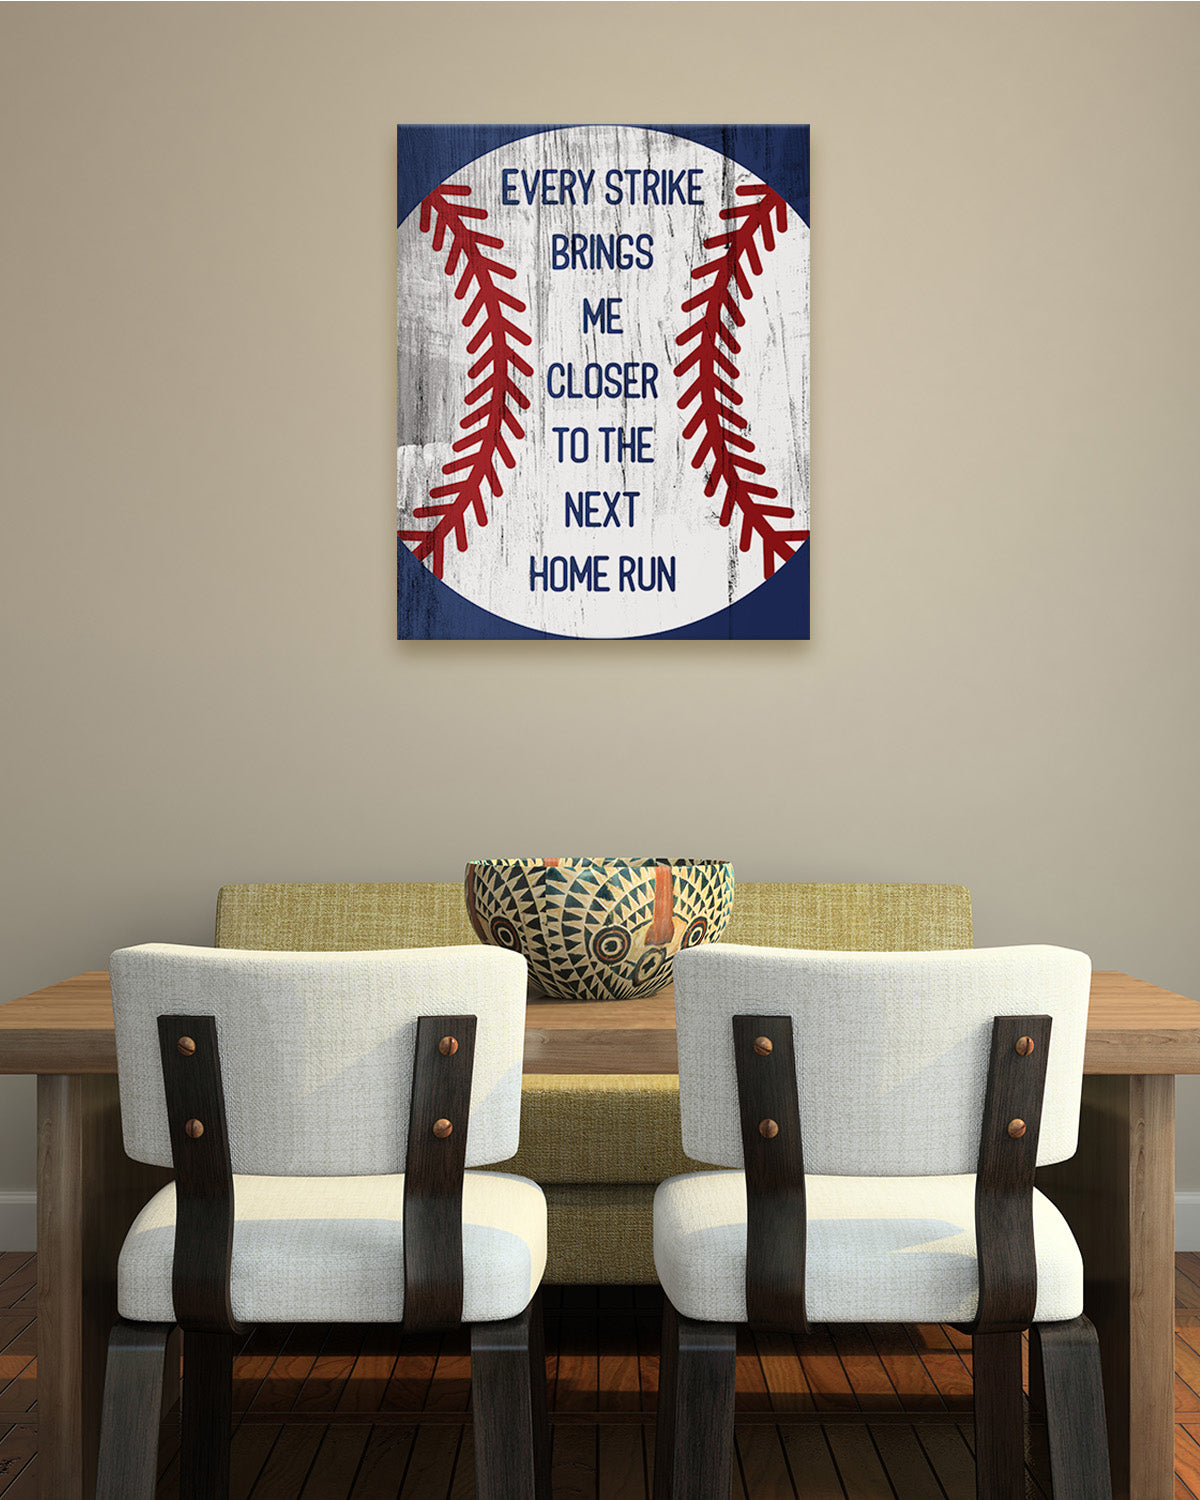 Every Strike Brings Me Closer To The Next Home Run - Baseball Wall Art Decor Print on a blue background